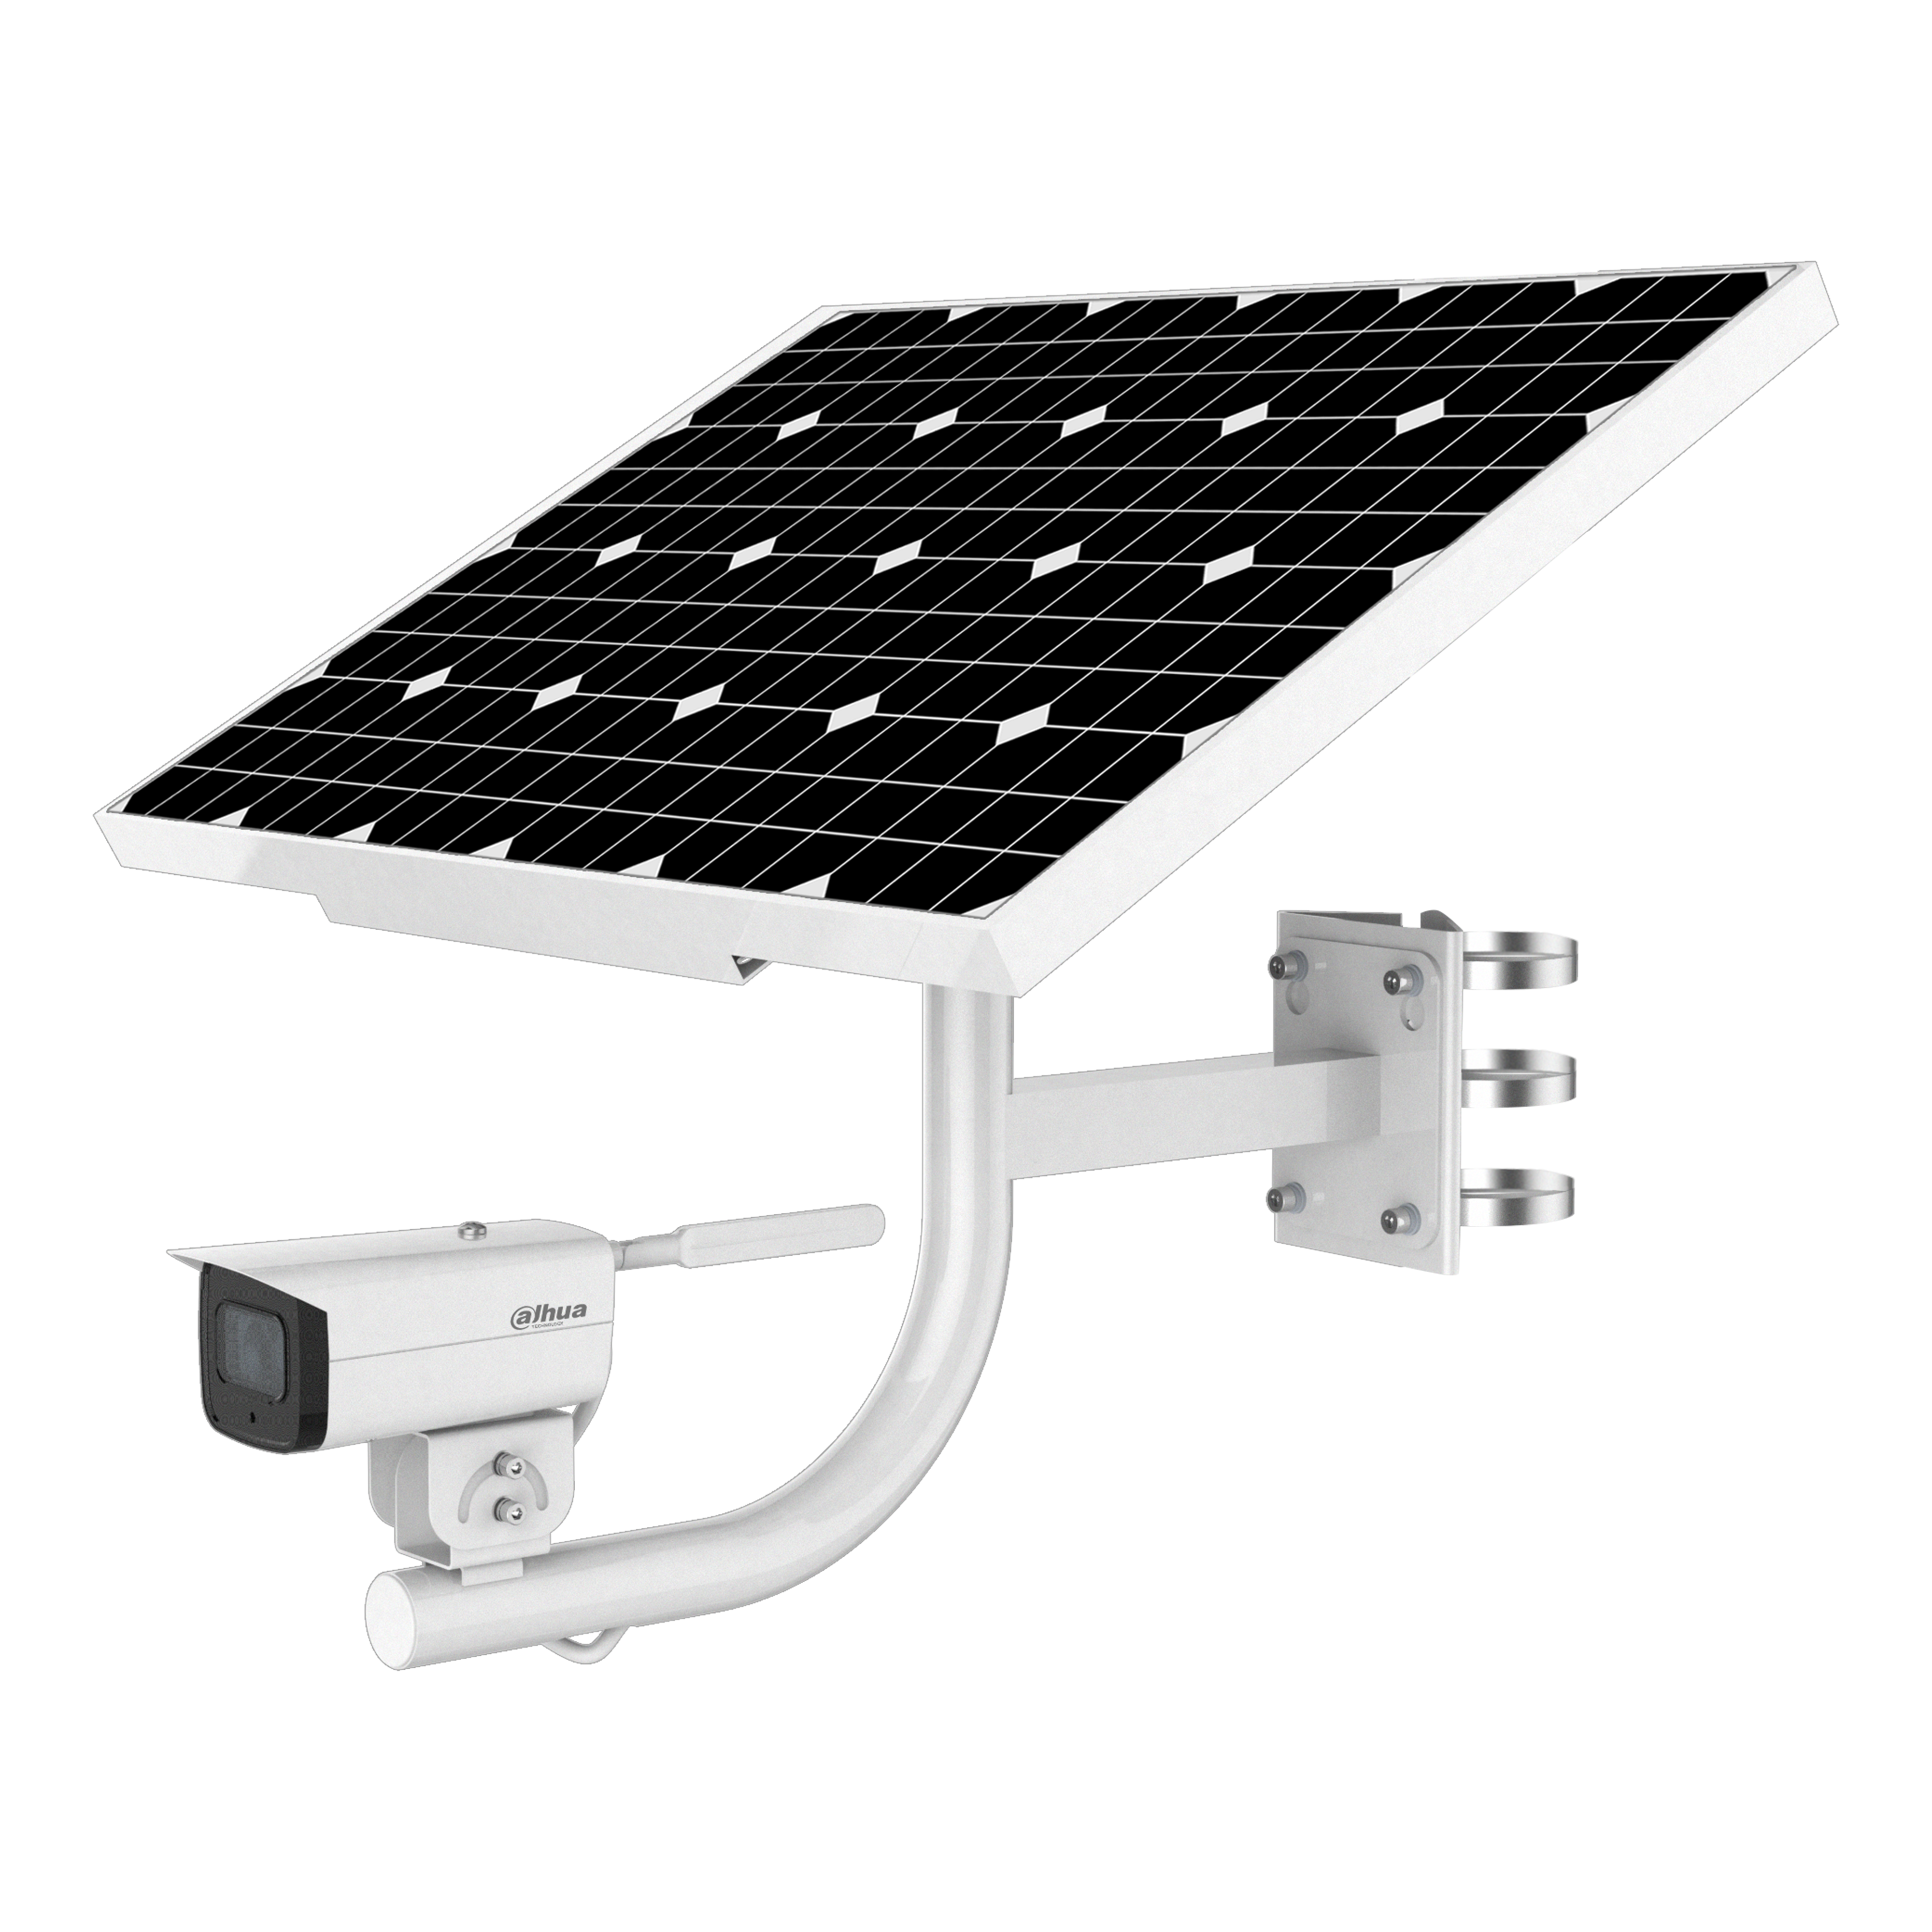 KIT/DH-PFM378-B60-W/DH-IPC-HFW - Dahua - Integrated Solar Power System (without Lithium Battery)